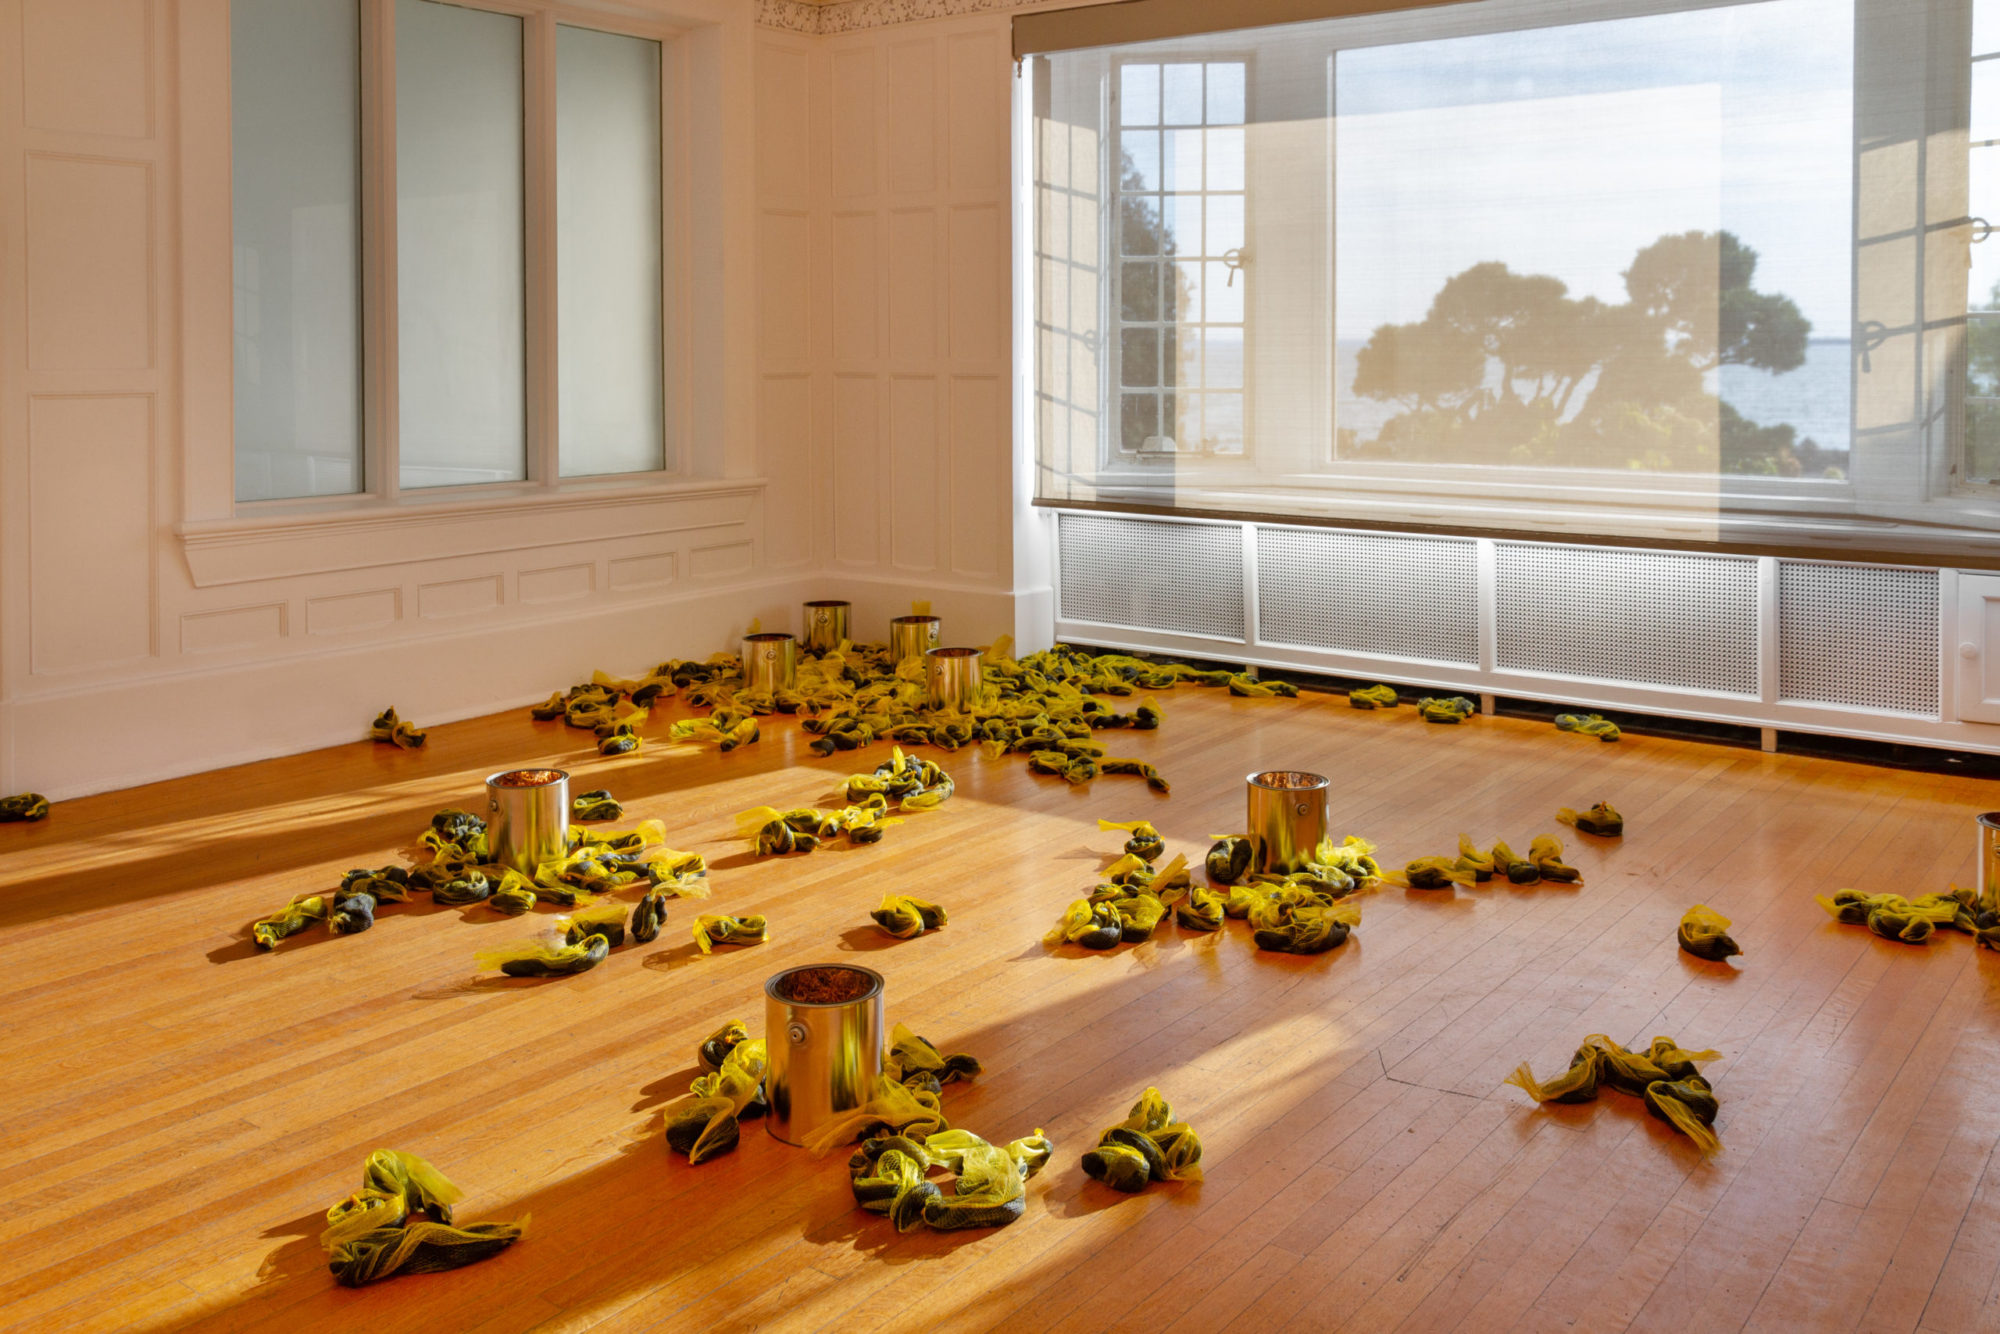 Installation shot of Laurie Kang's work entitled 'Bloom' - black polymer clay 'worms' encased in yellow mesh lay scattered around a room - the clay pieces centralize around silver reflective paint cans